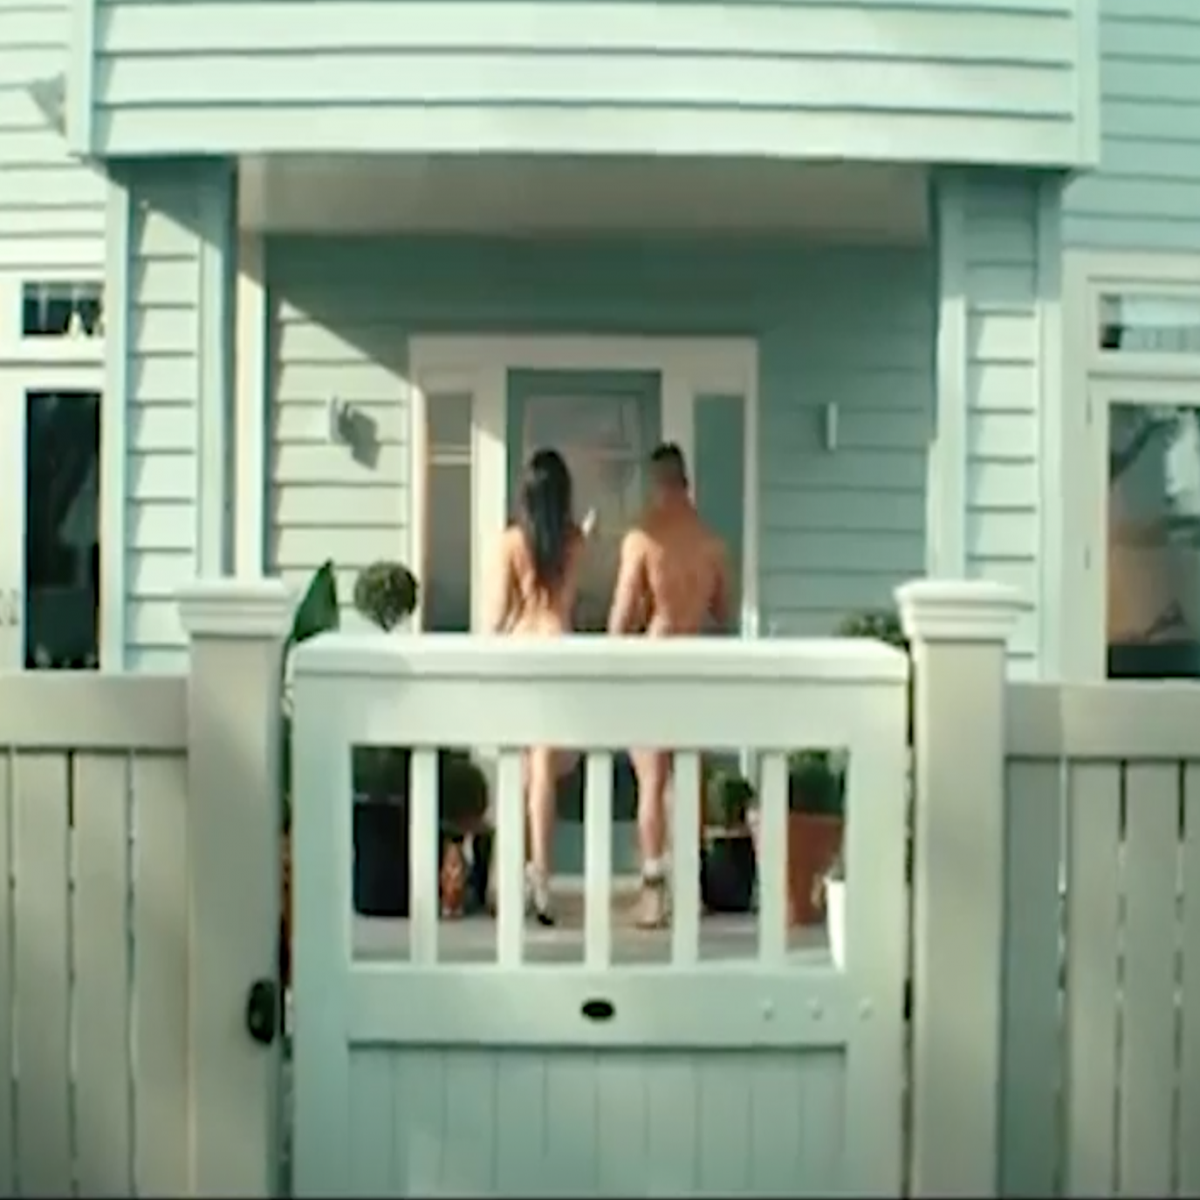 New Zealand Nudist - New Zealand advert featuring nude 'porn actors' praised for promoting  internet safety | The Independent | The Independent